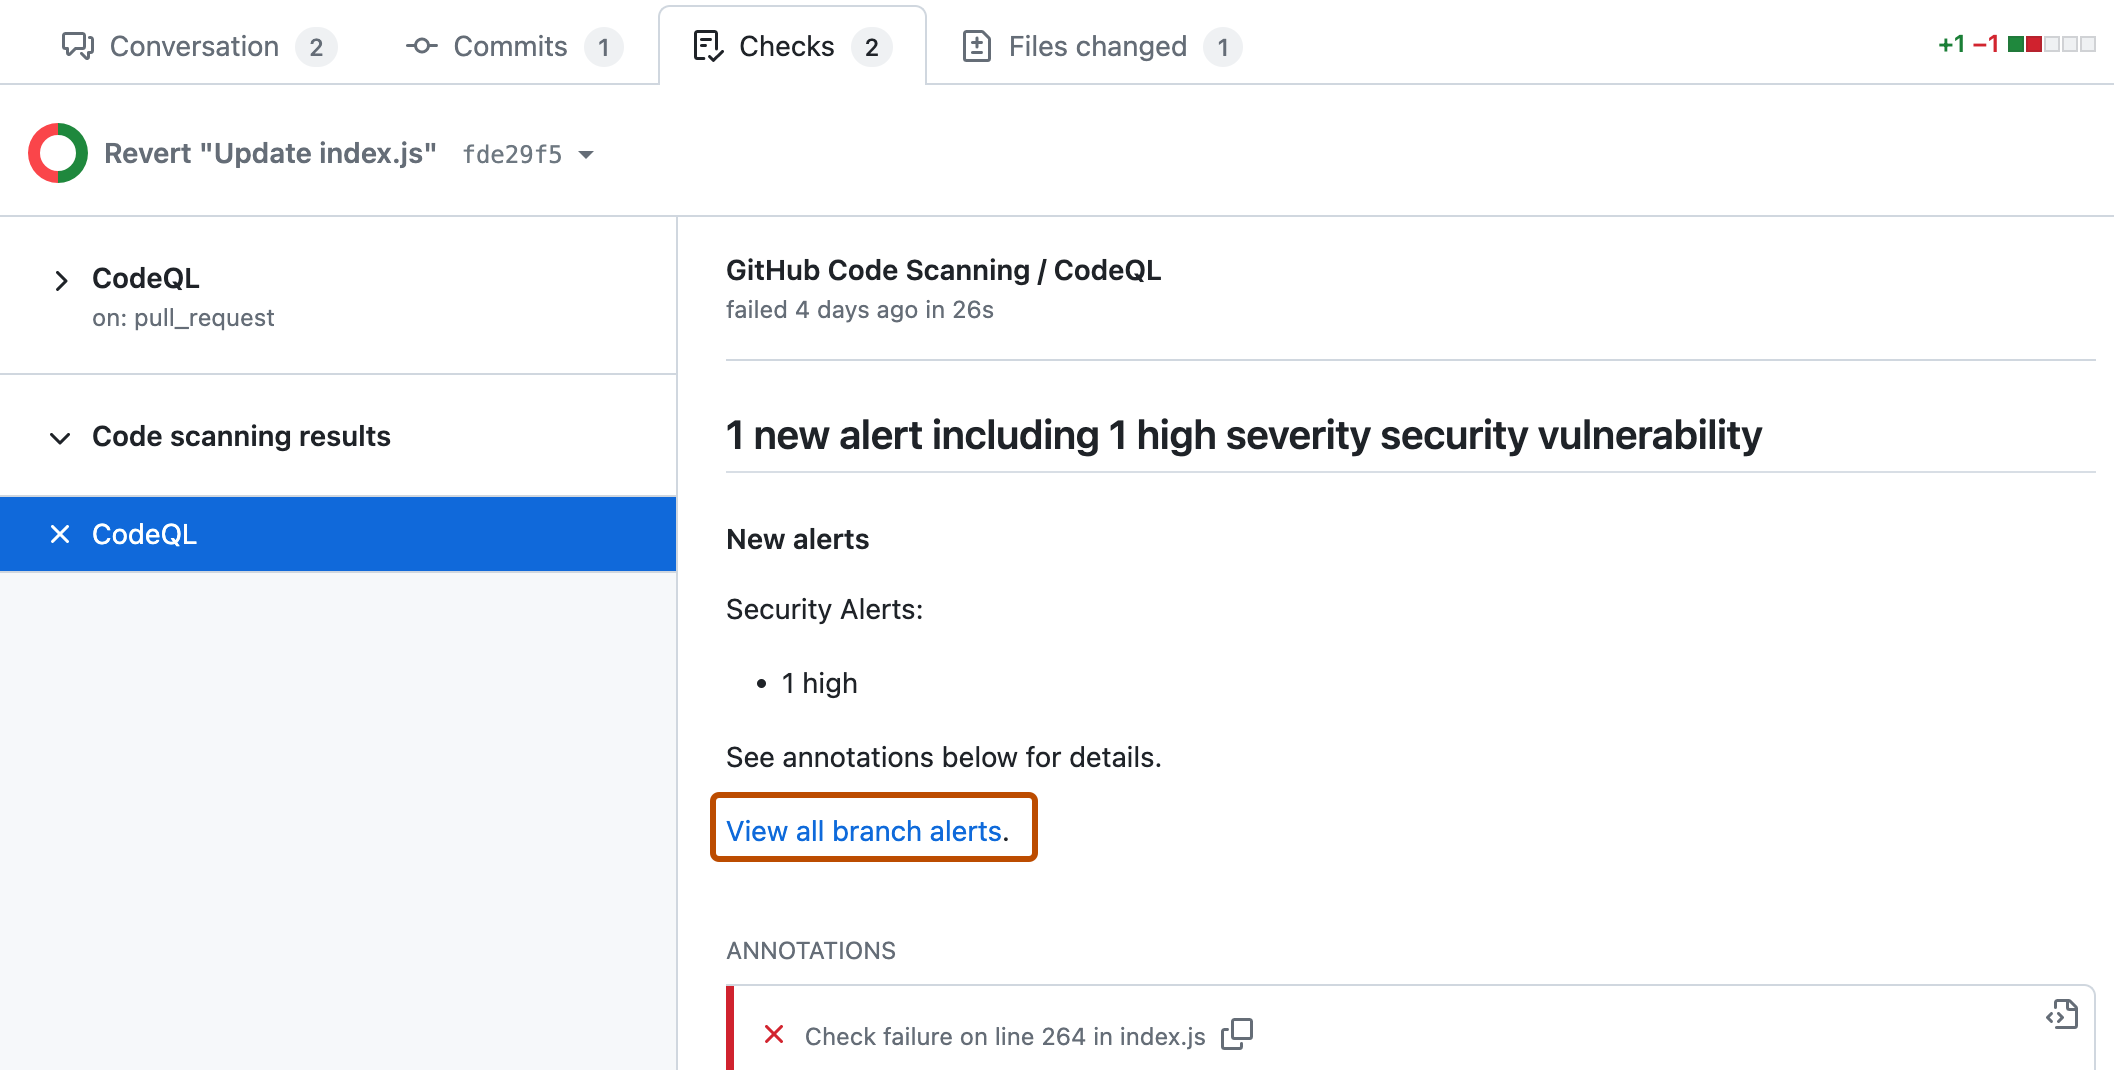 Screenshot of the Code scanning results check on a pull request. The "View all branch alerts" link is highlighted with a dark orange outline.